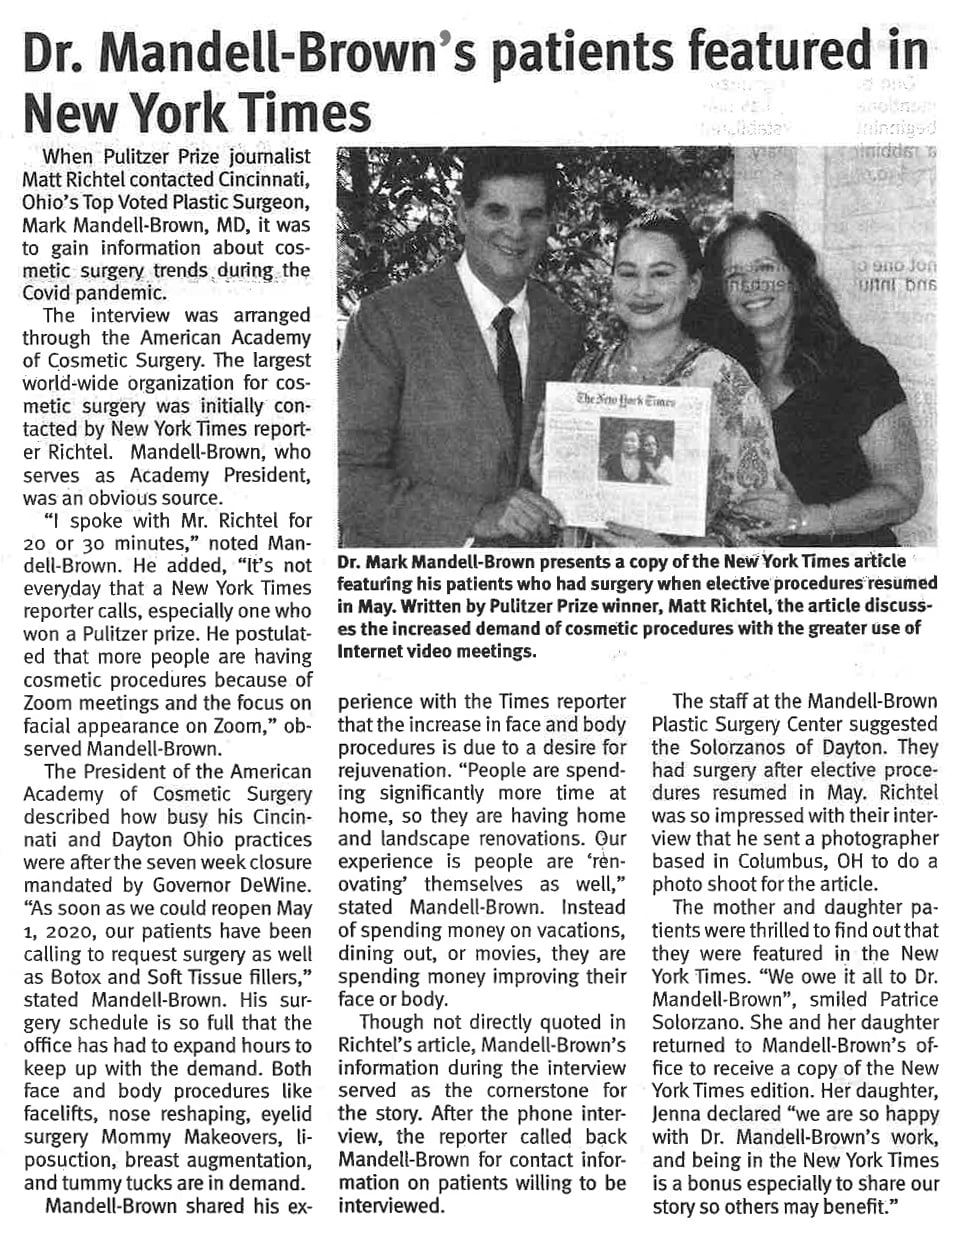 Article clipping on Dr. Mark Mandell-Brown and his patient featured in New York Times